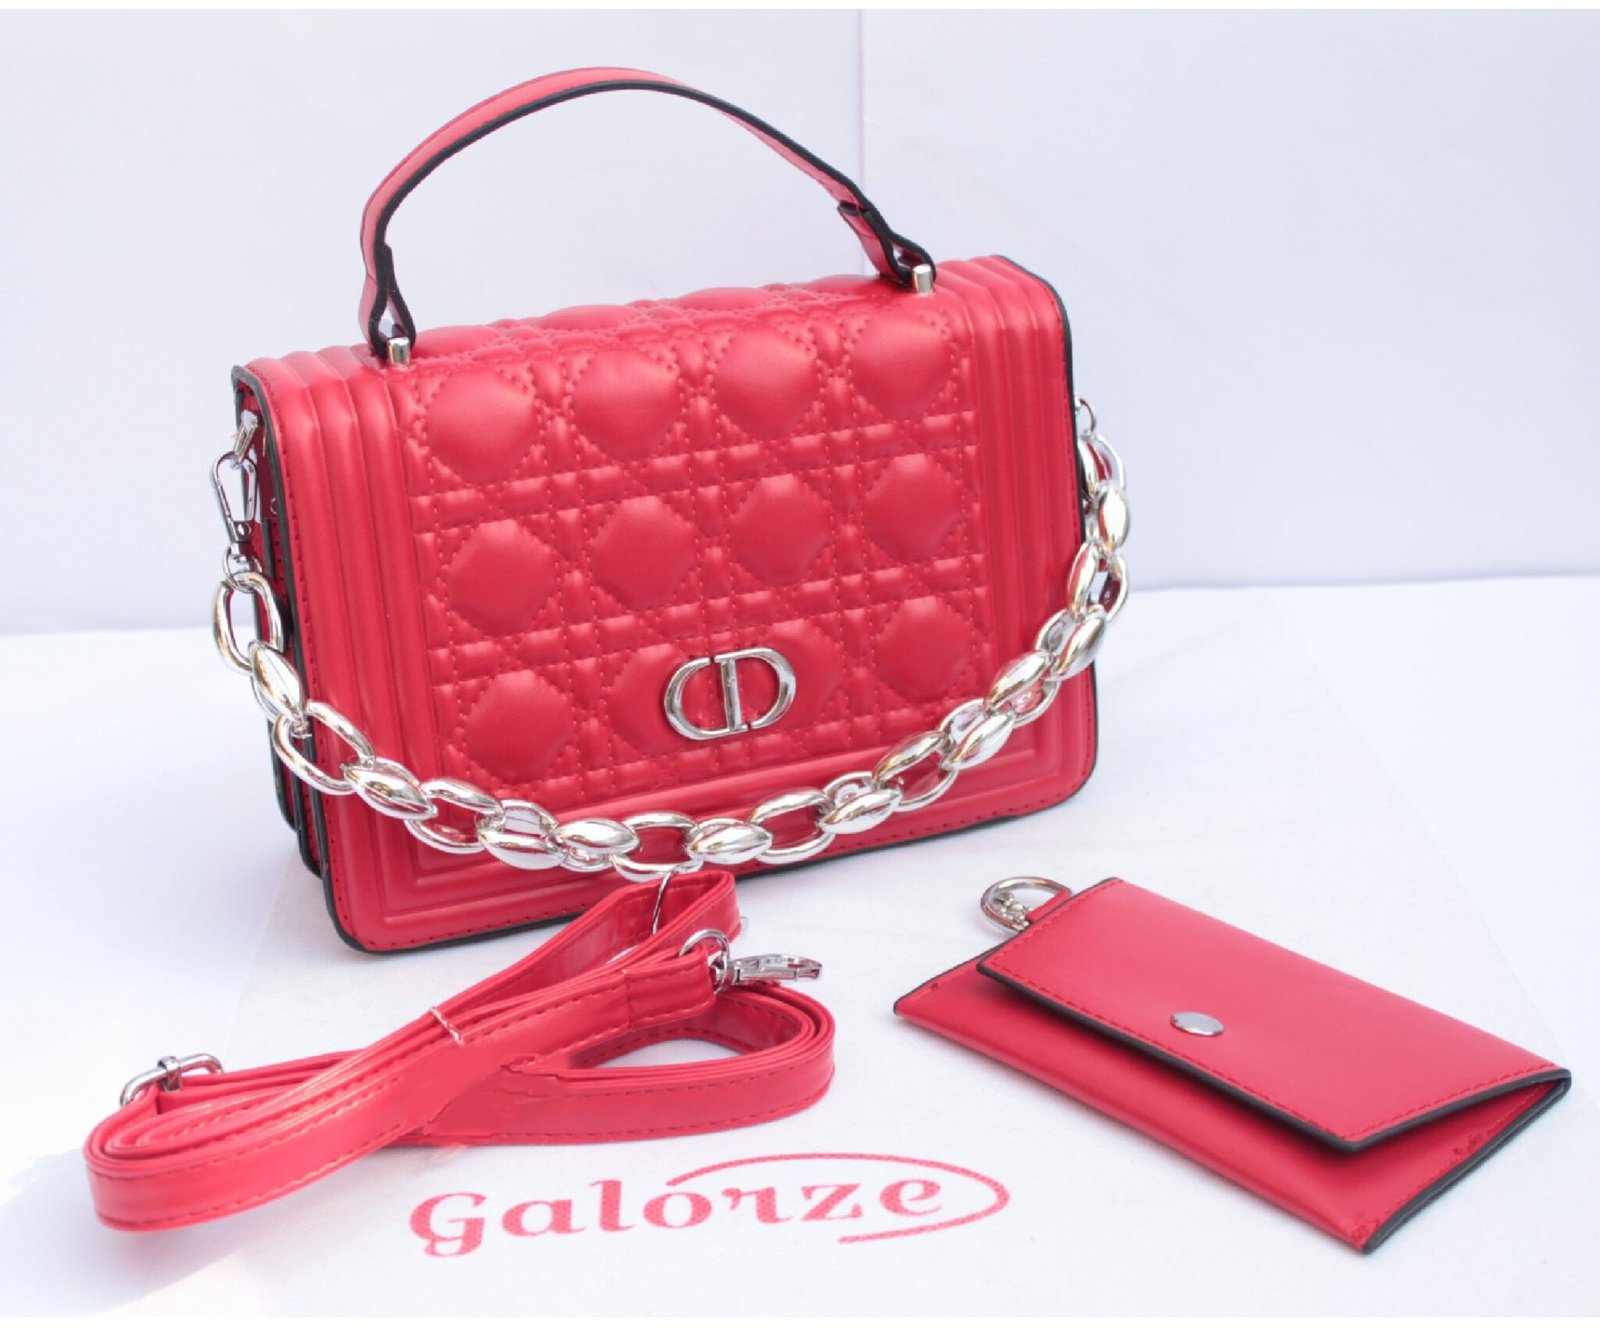 Galorze: Scarlet red crossbody bag, smart bag with a keychain pouch.